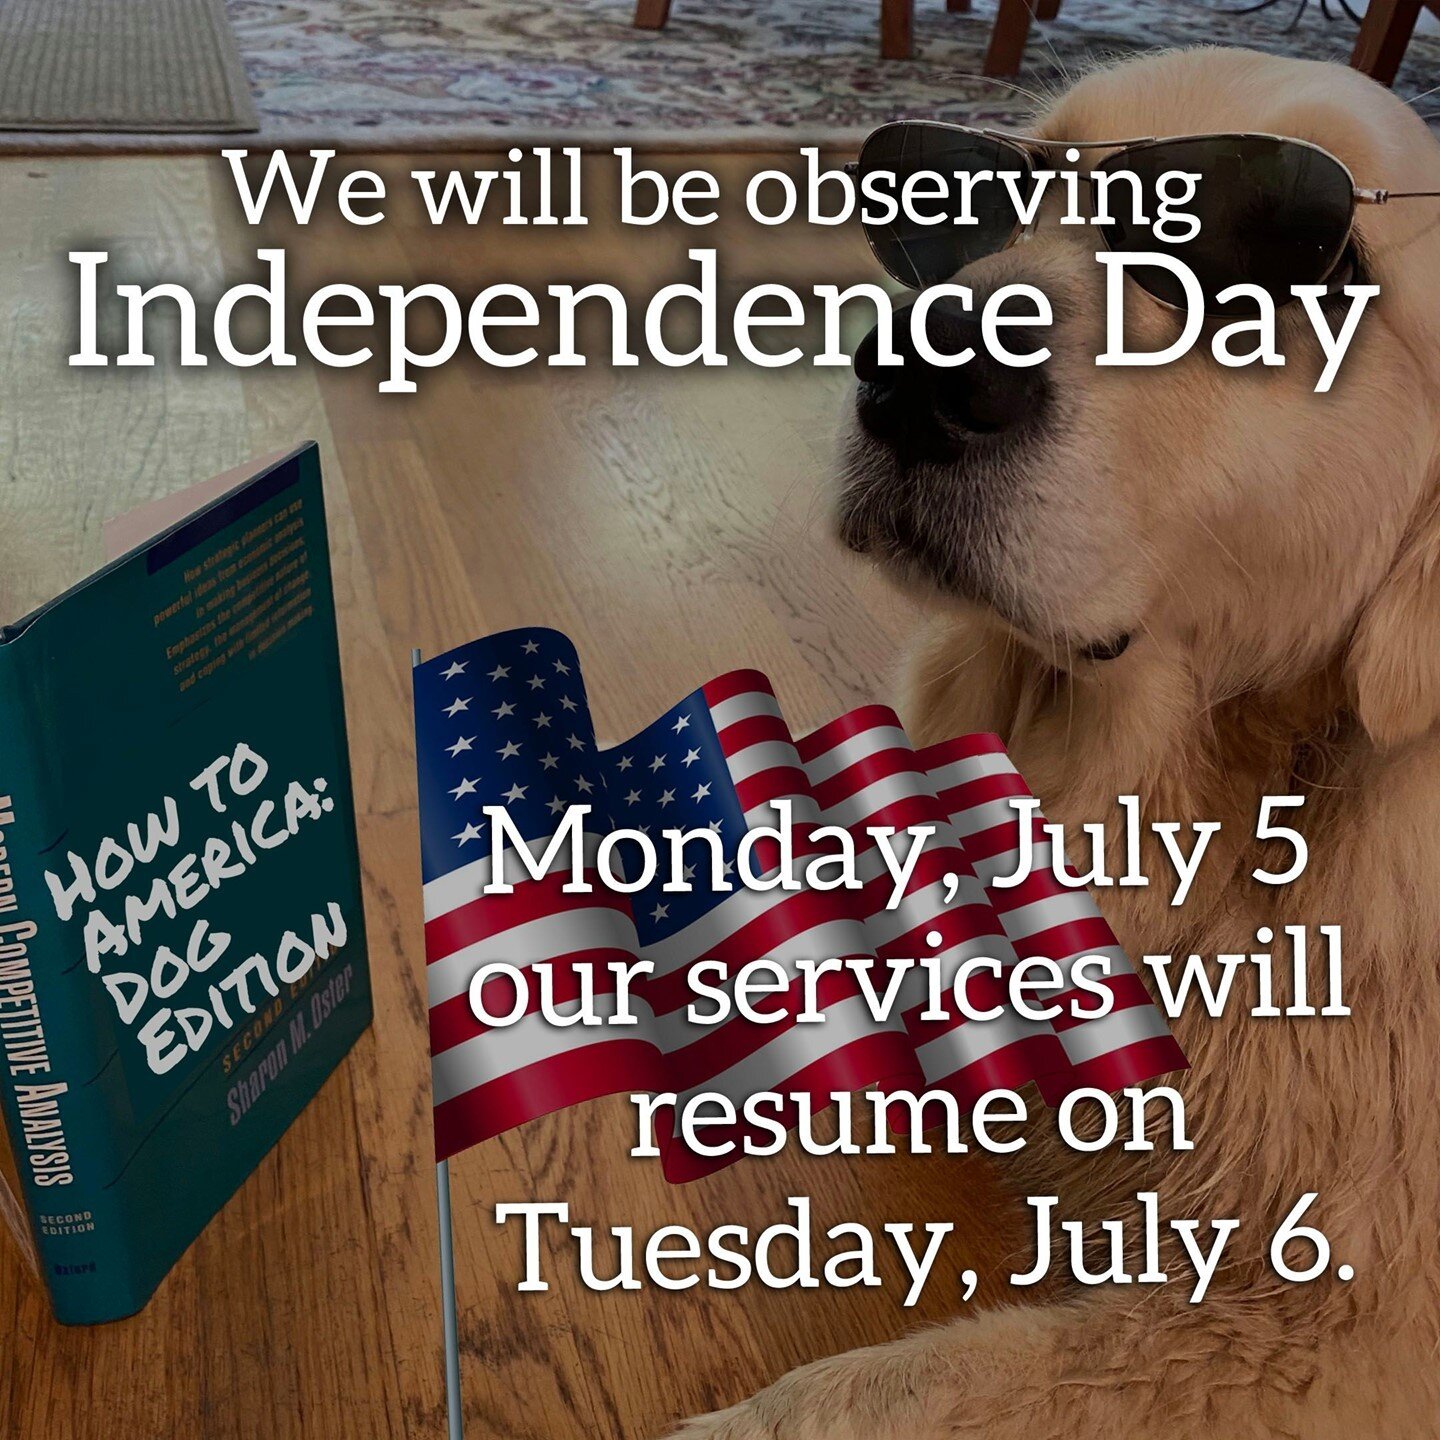 Just a friendly reminder that Highland Hounds will be observing Independence Day on Monday, July 5. Our normal services will resume on Tuesday, July 6. Check Petpocketbook for updates scheduling or reach out to us at info@highlandhounds.net 🗽🇺🇸